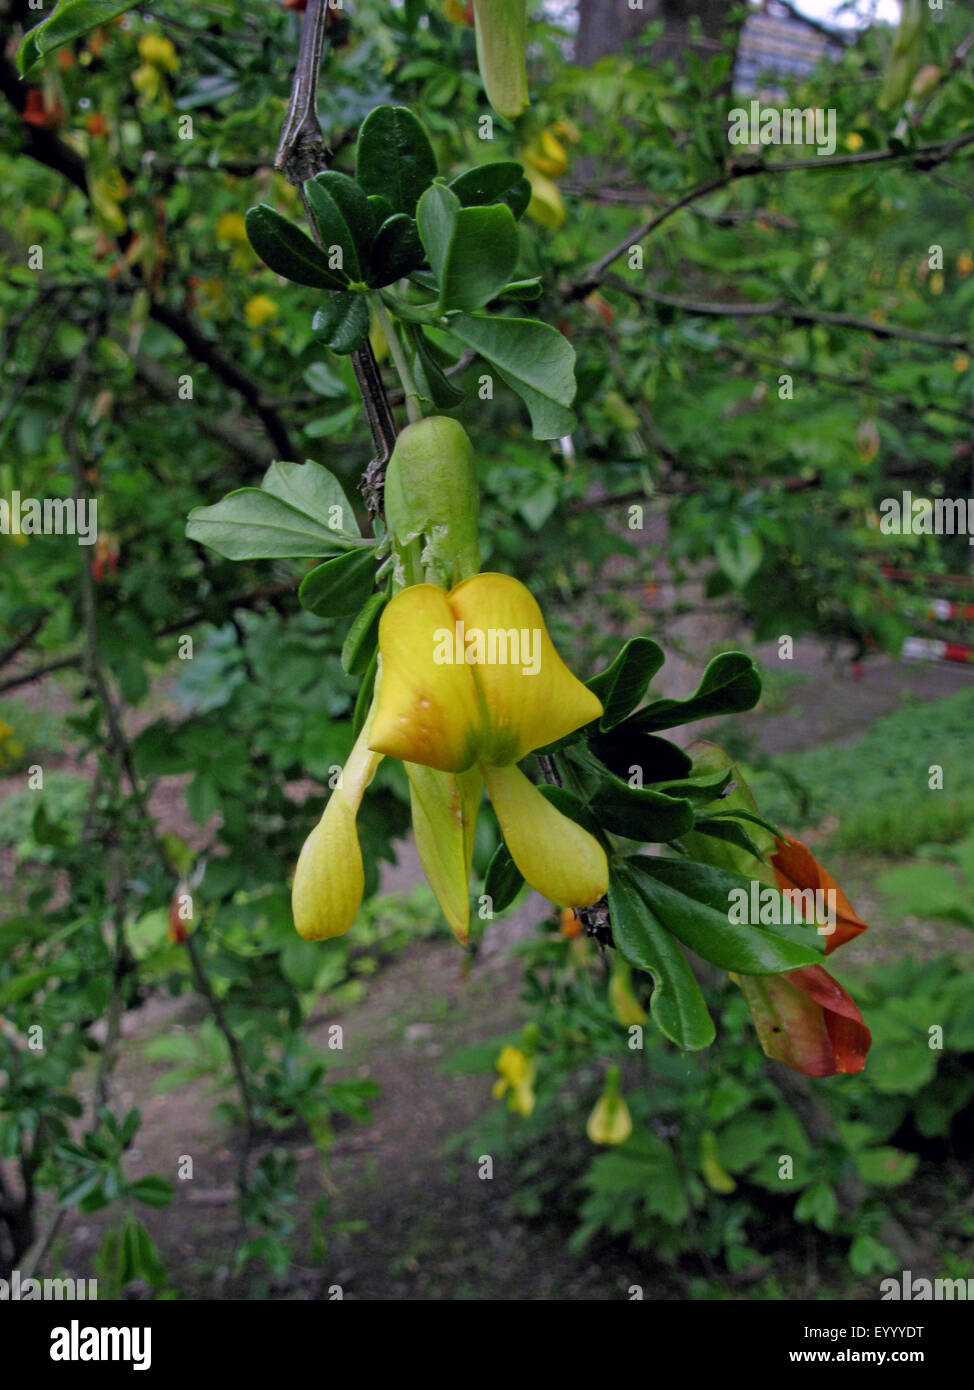 Chinese pea shrub (Caragana sinica), blooming branch Stock Photo